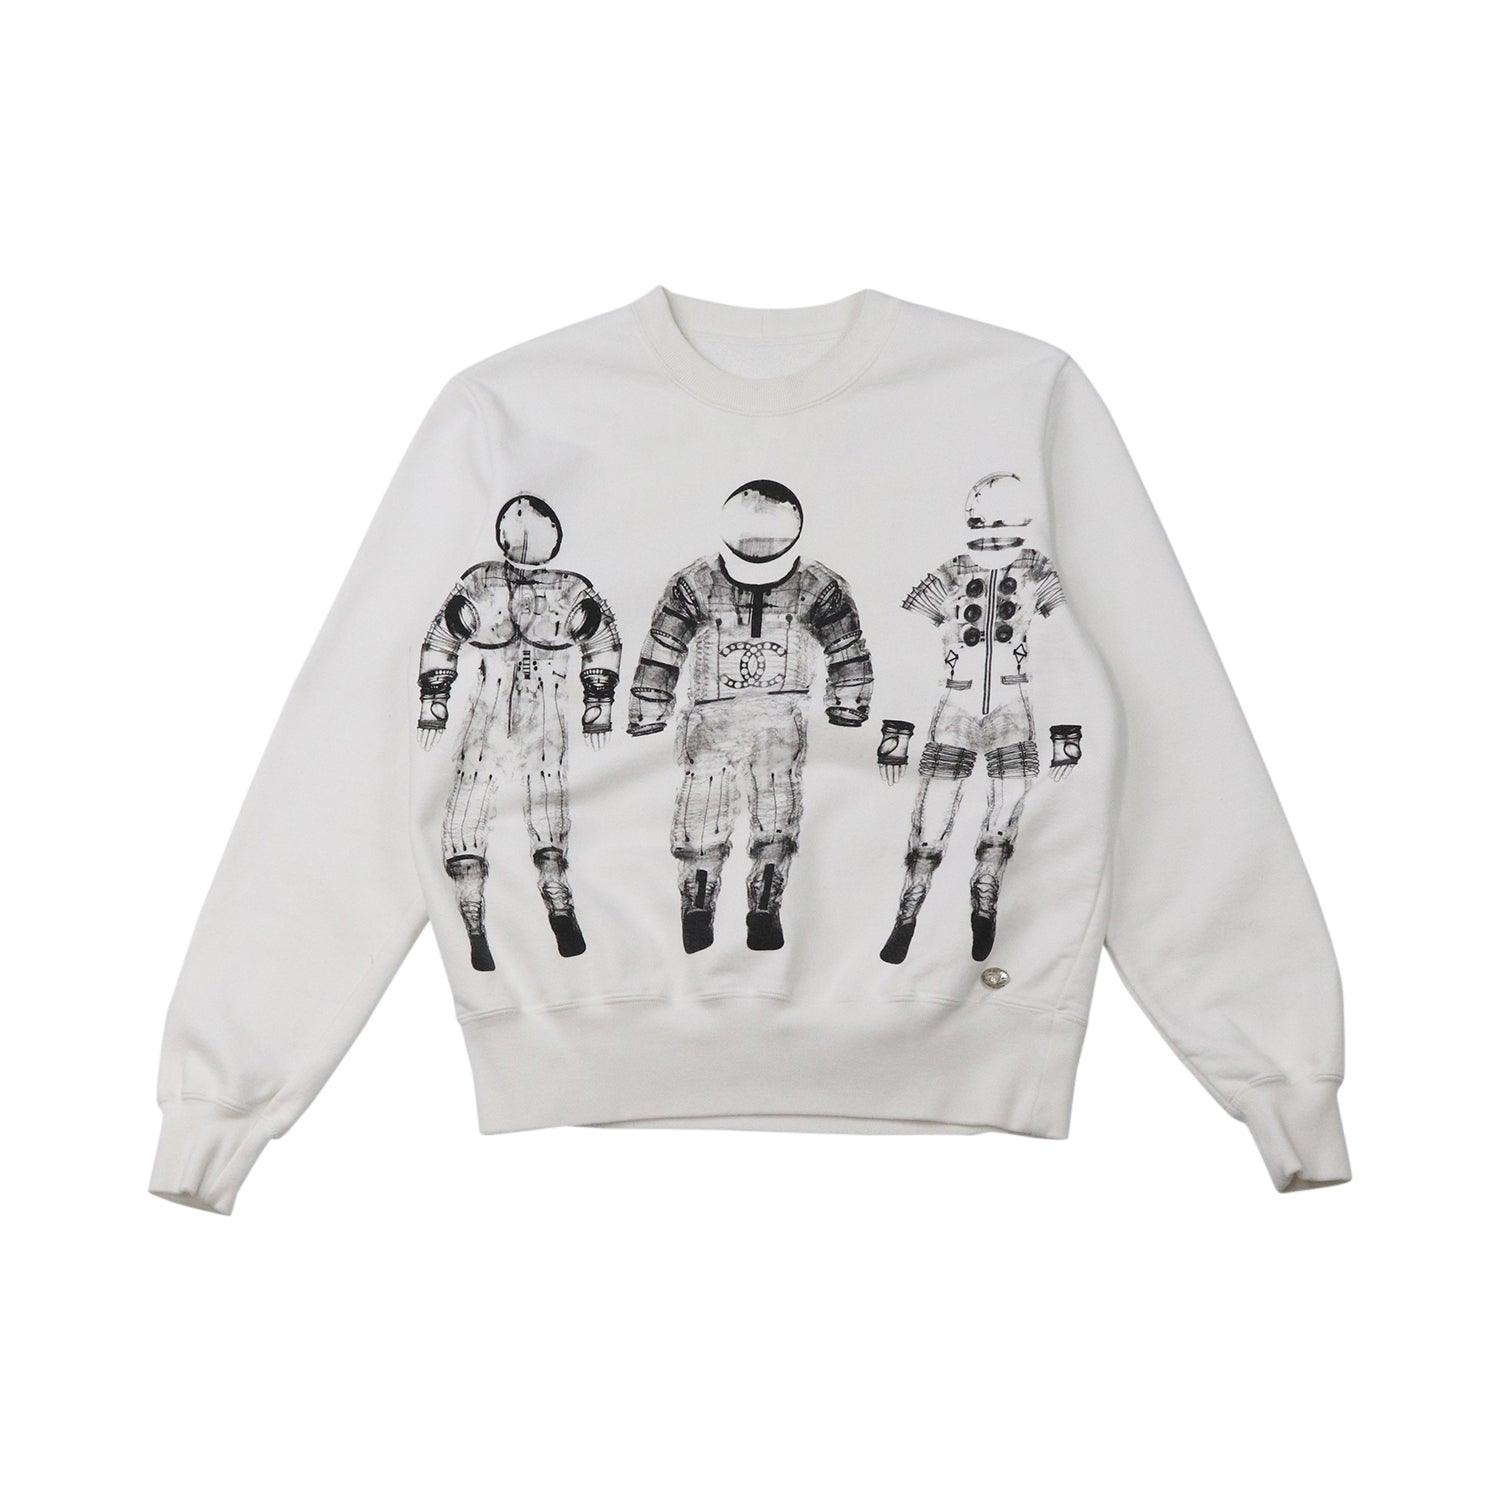 Chanel Astronaut Sweater - Women's 36 - Fashionably Yours